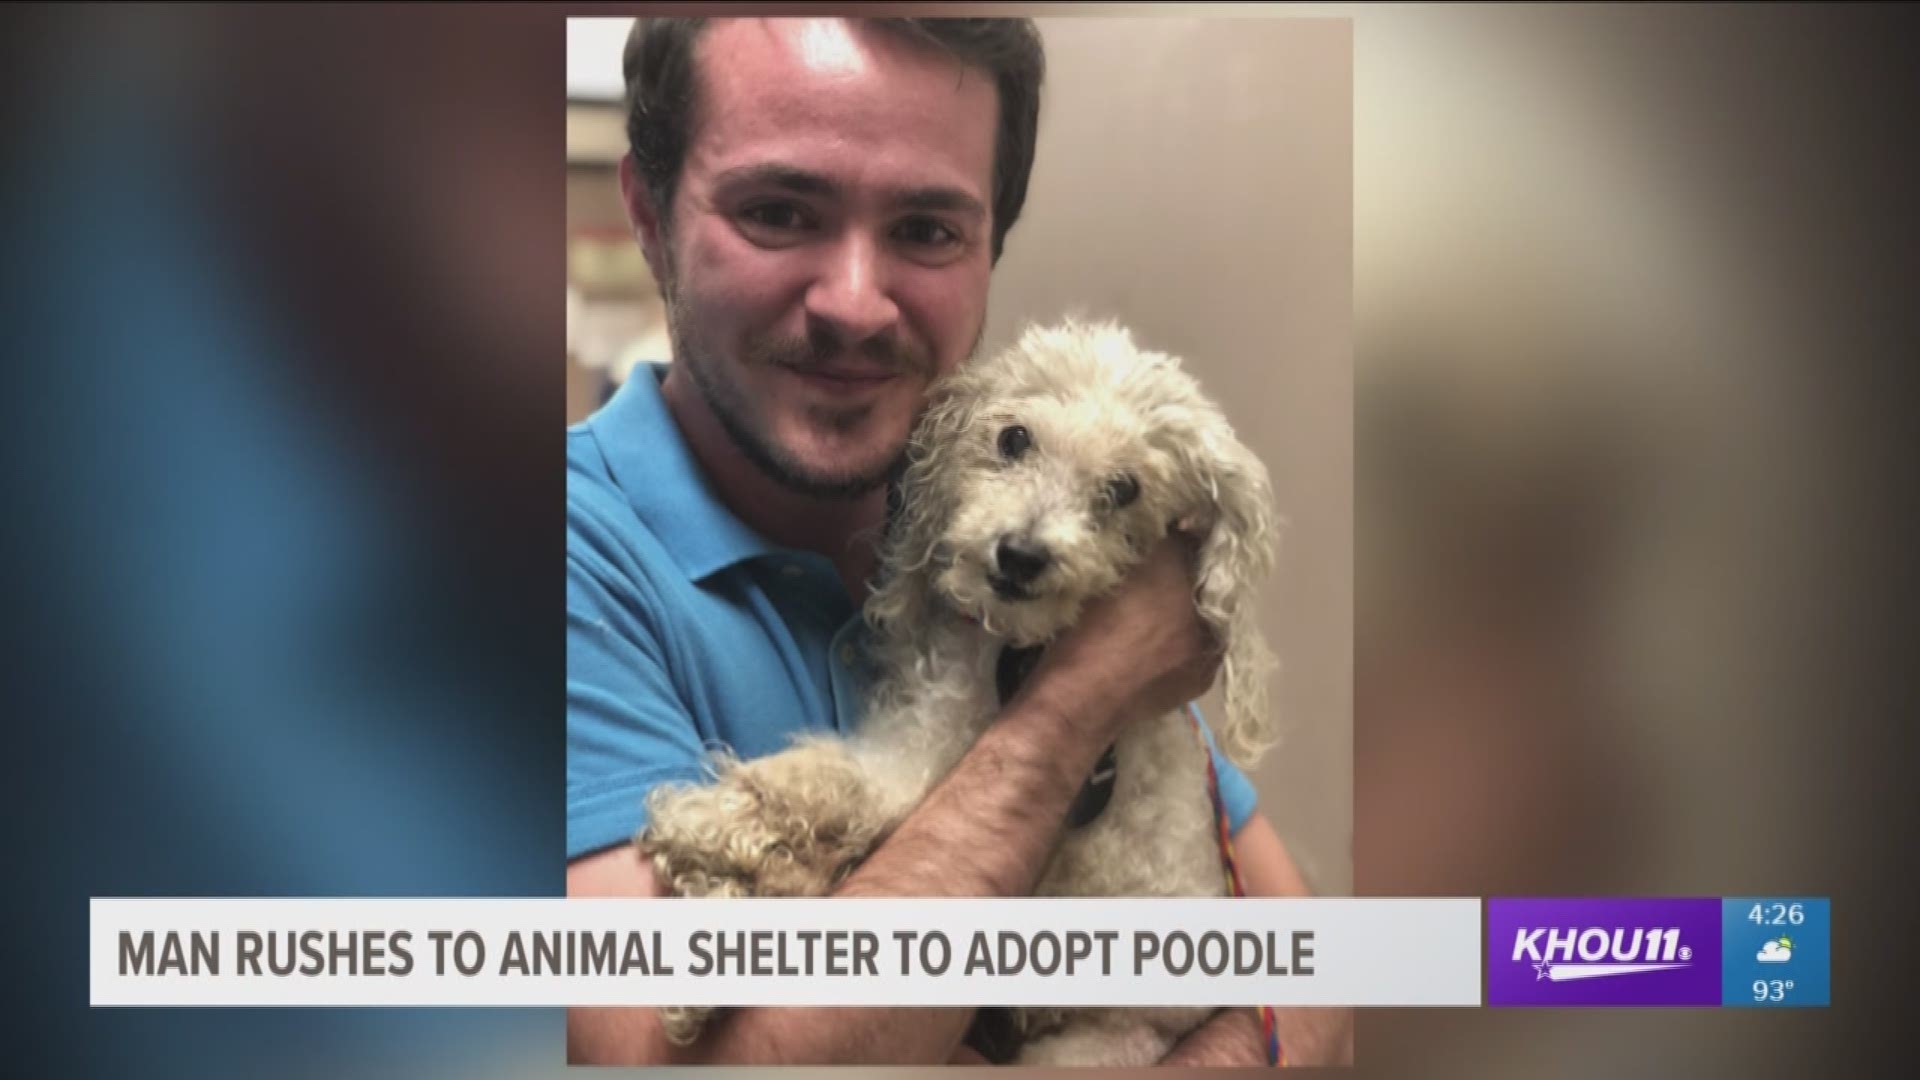 It was love at first sight this week for a Houston-area man and his new furry friend.